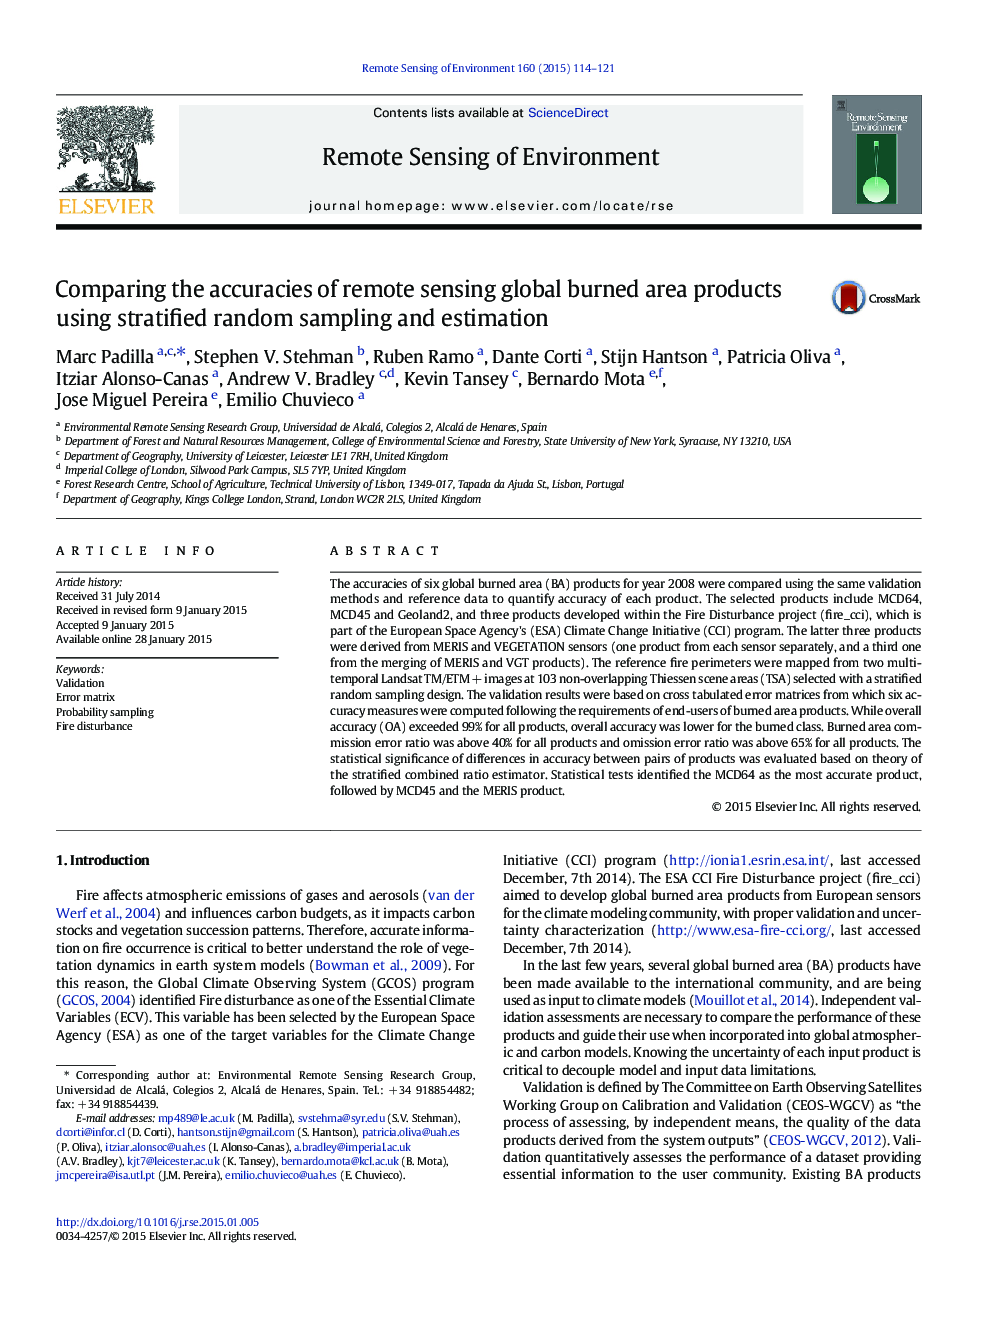 Comparing the accuracies of remote sensing global burned area products using stratified random sampling and estimation